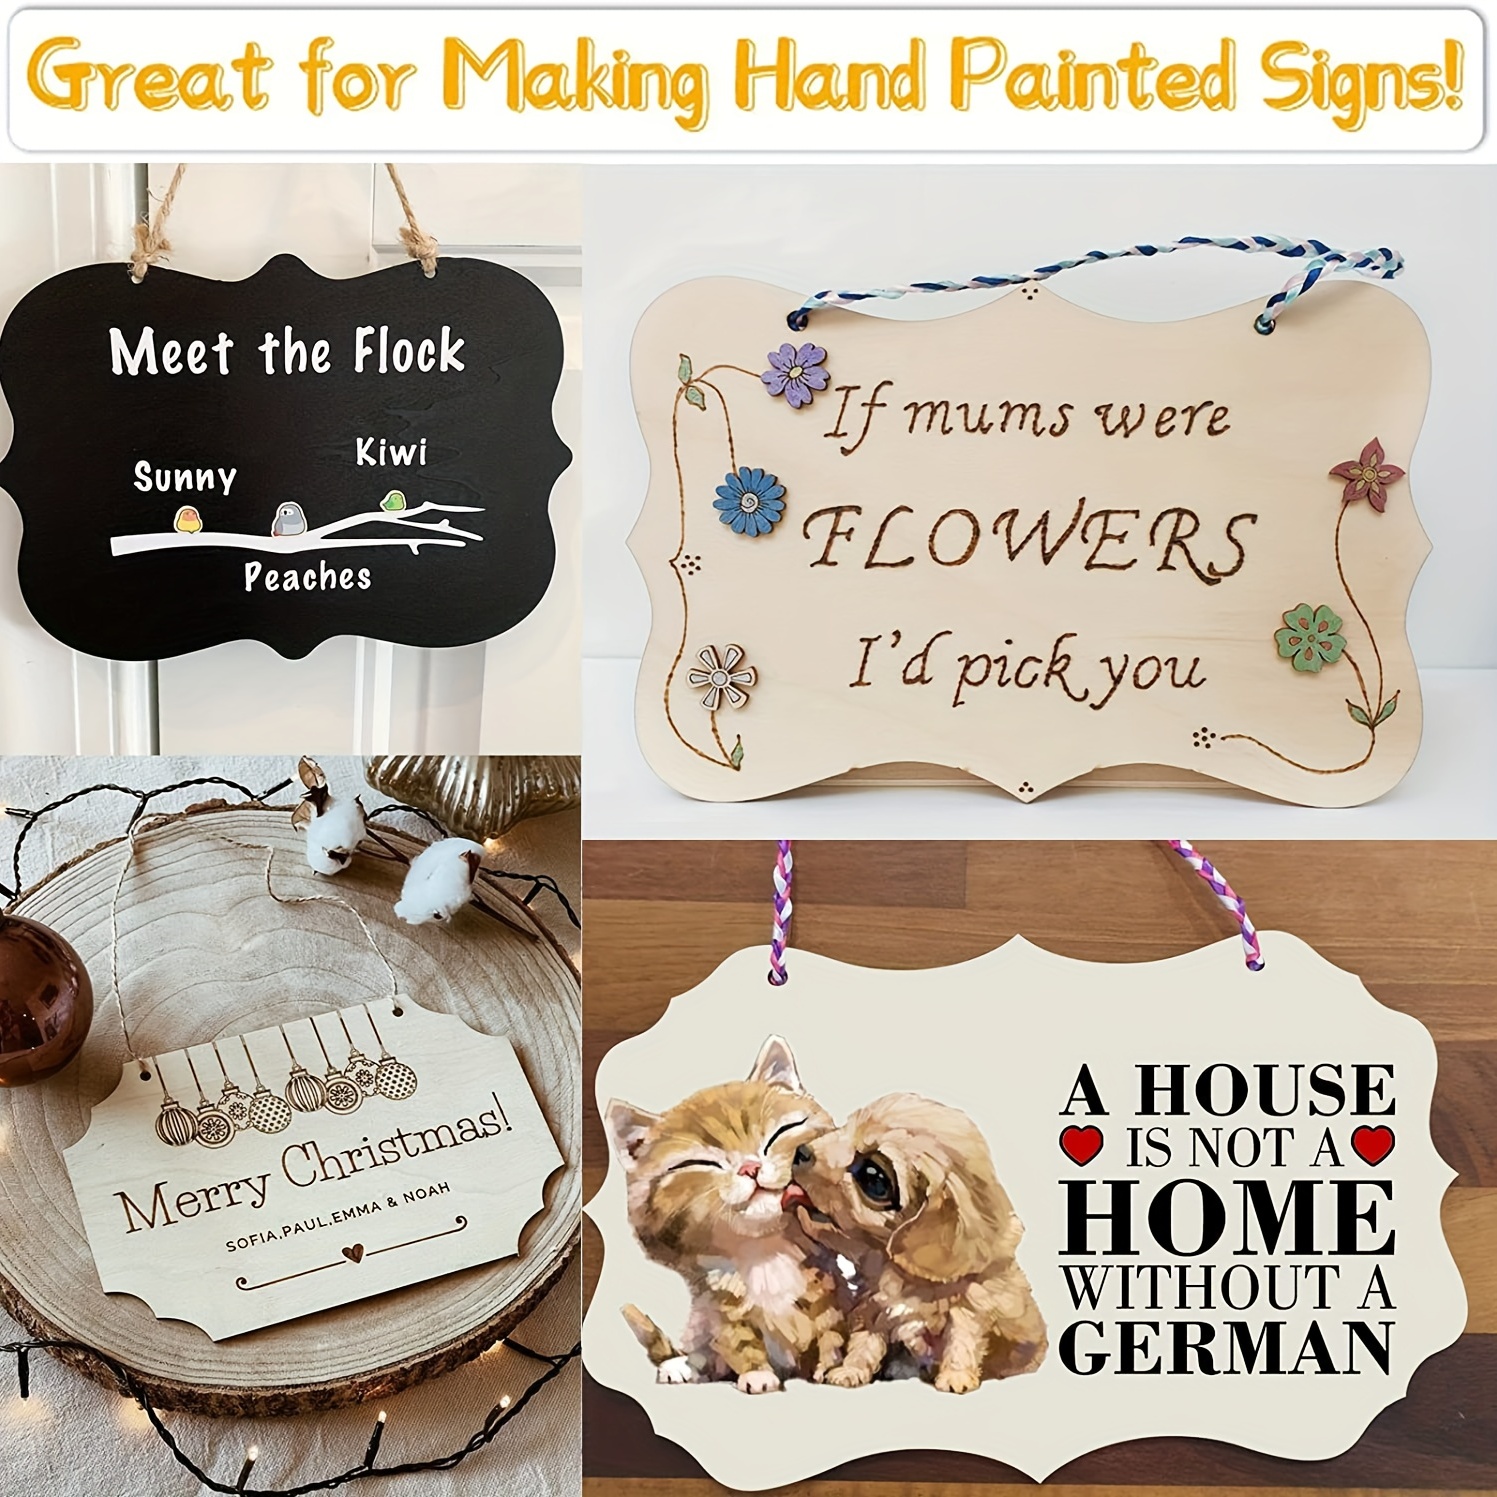 Hanging Wood Plaques for Crafts with Hemp Rope, DIY Painting Blank Wooden  Sign for Garden Decor Festival Suppliers